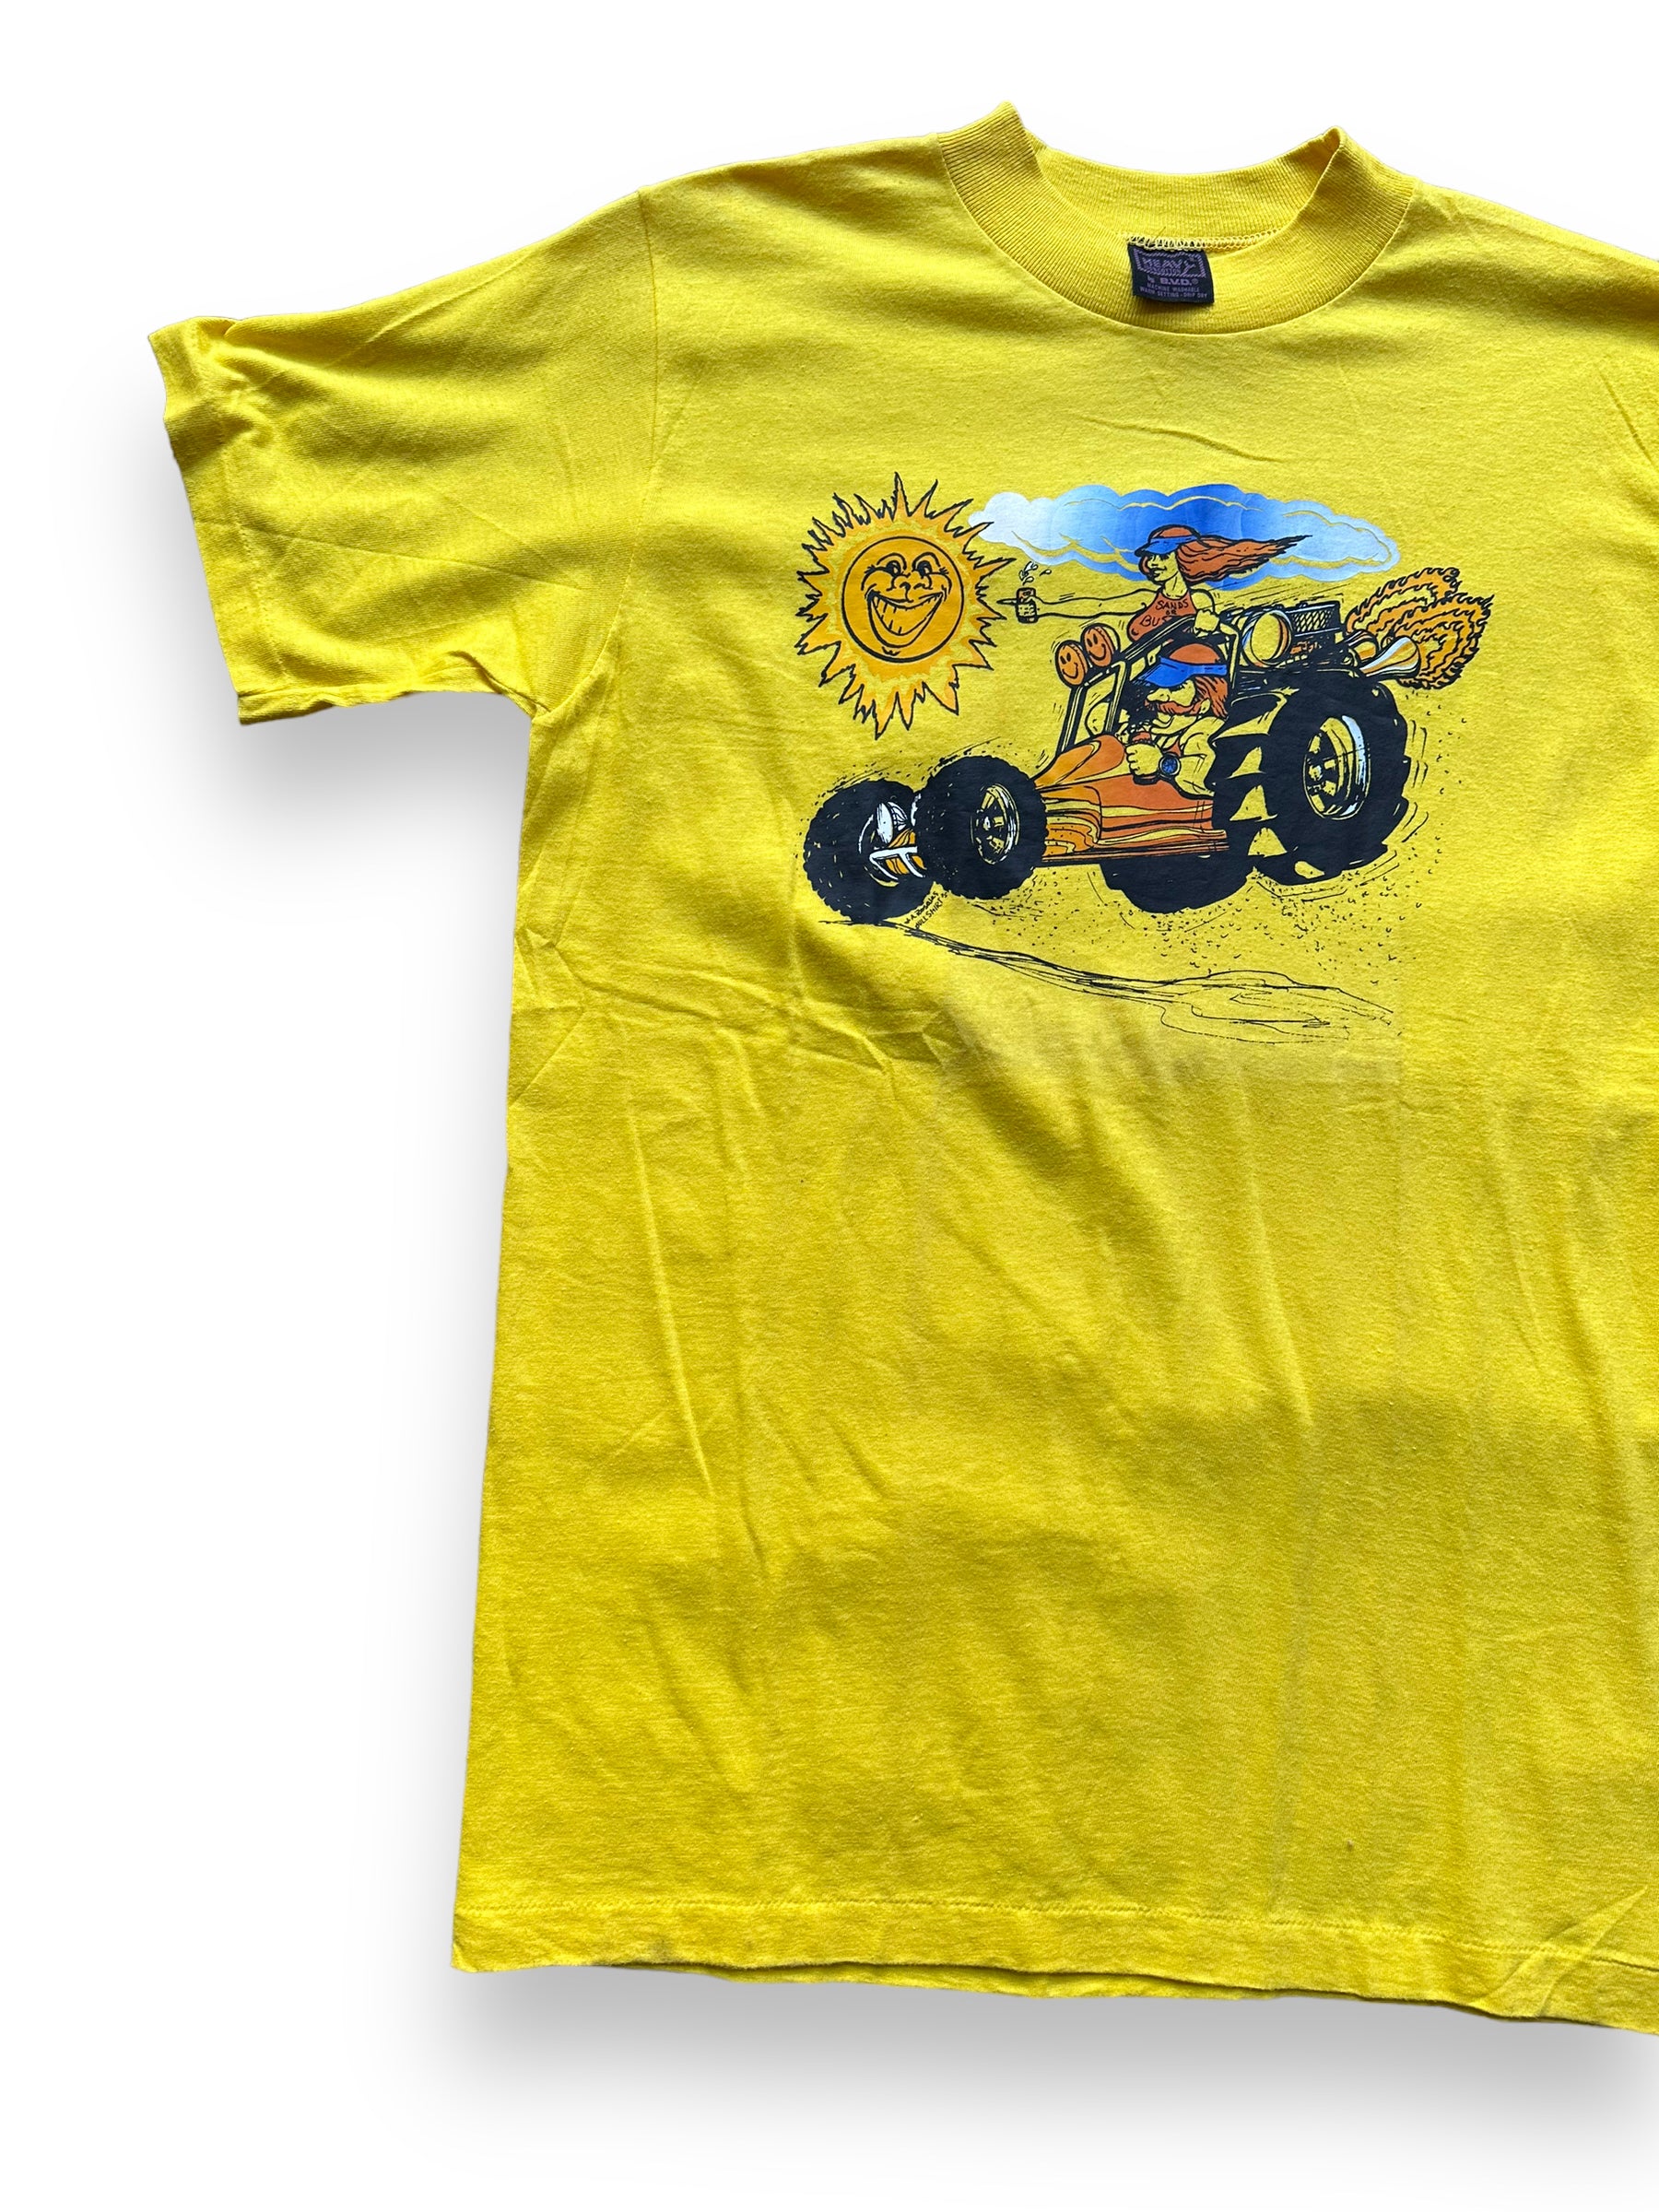 Front Right View of Vintage Dune Buggy Graphic Tee SZ L | Vintage Bull Shirt Graphic T-Shirts Seattle | Barn Owl Vintage Tees Seattle